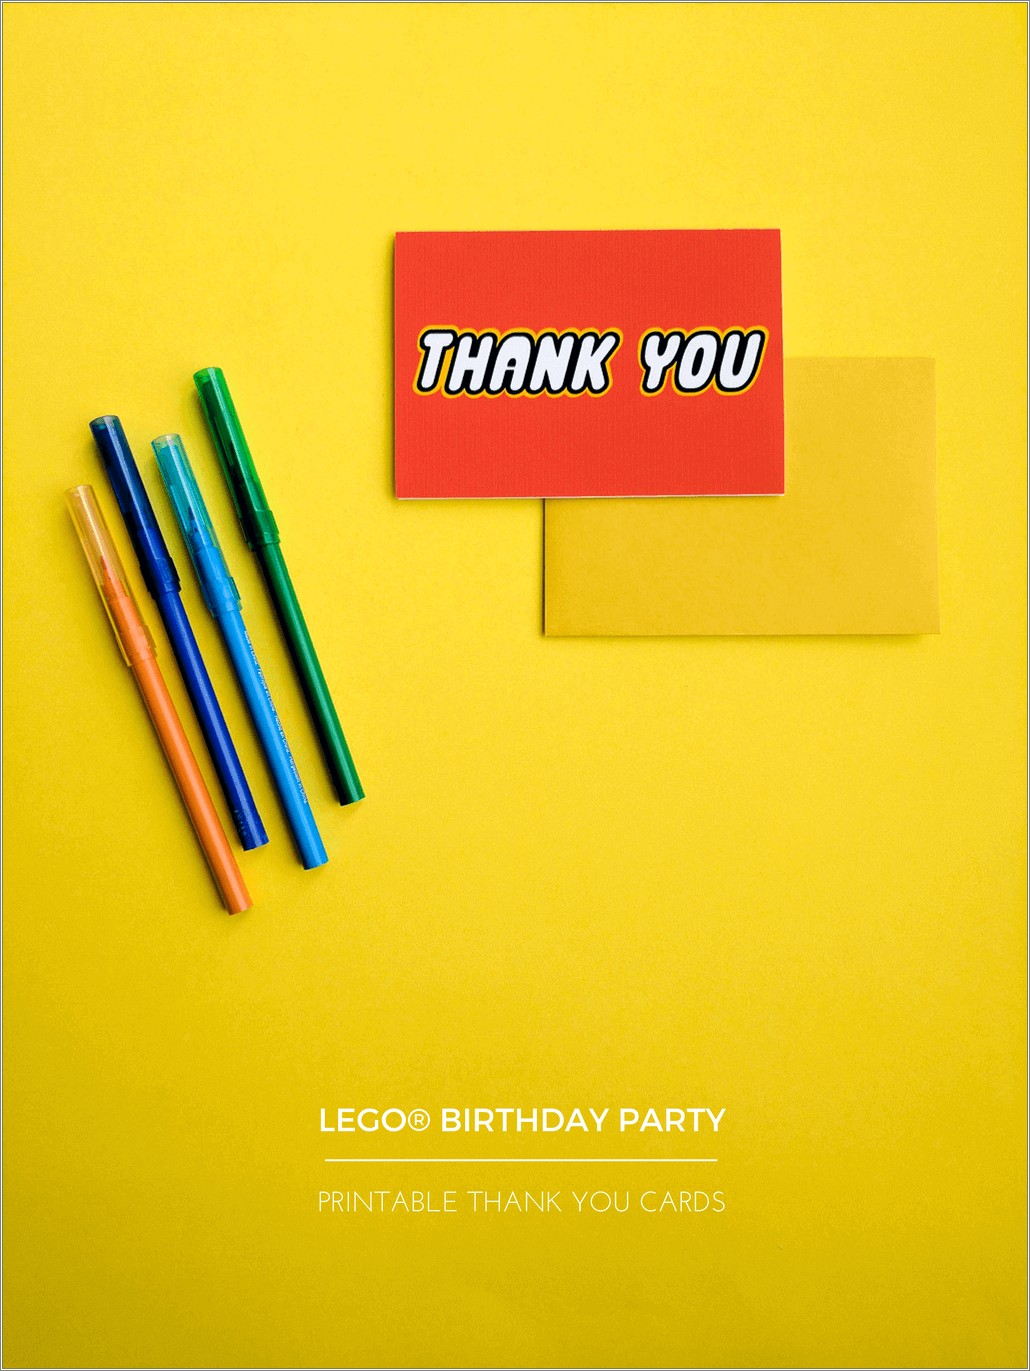 free-printable-birthday-thank-you-card-template-resume-example-gallery